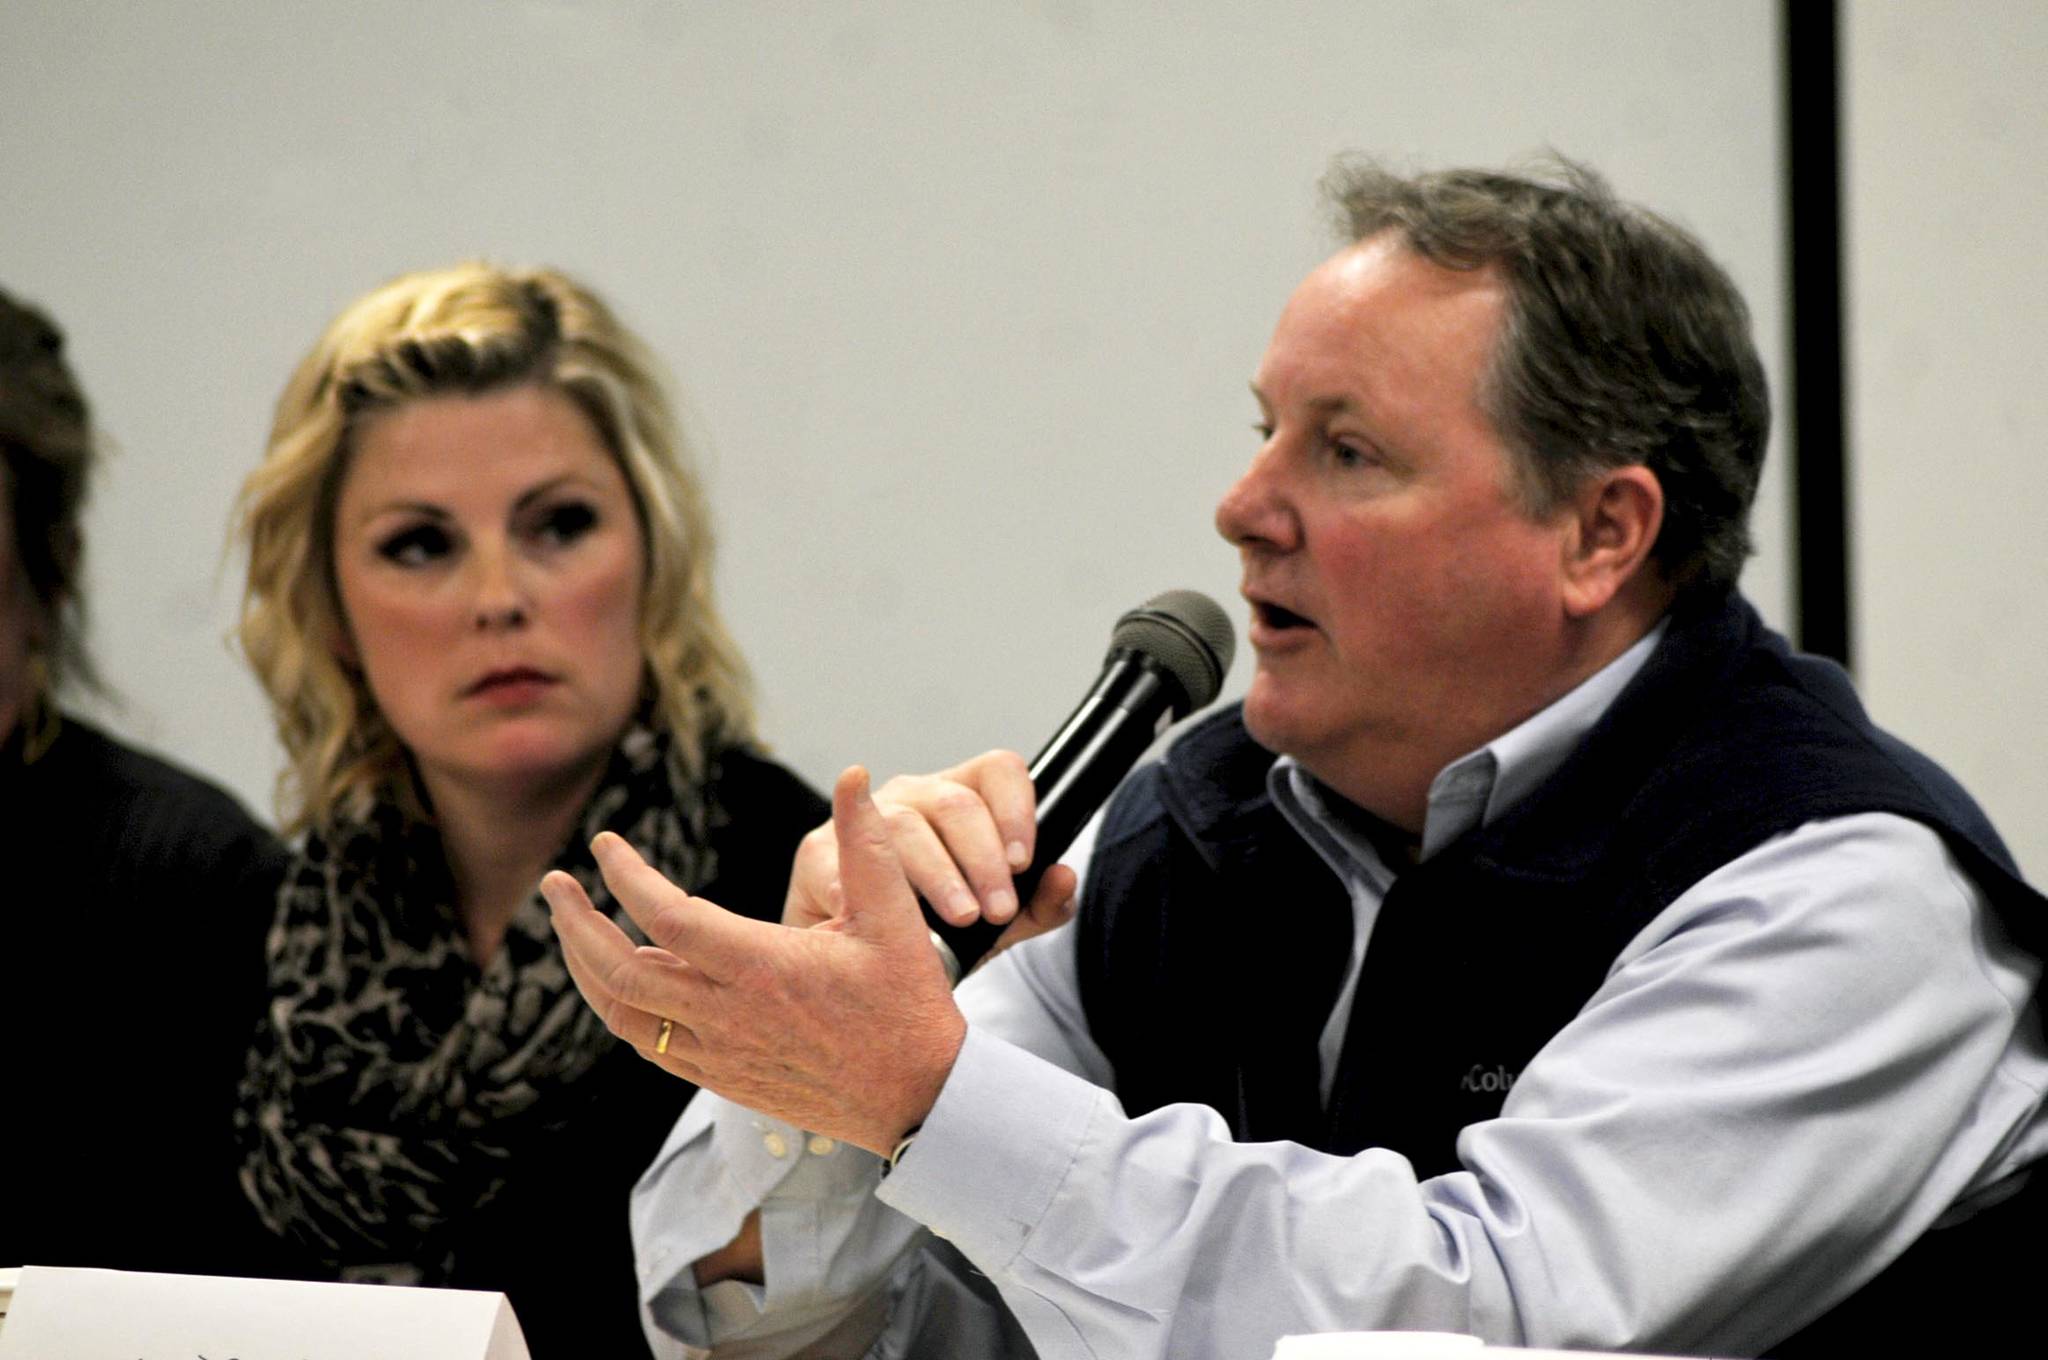 Jim Butler, a Kenai attorney and Cook Inlet commercial setnet fisherman, addresses a question during a forum on salmon habitat policy at Cook Inlet Aquaculture Association’s headquarters Thursday, Dec. 14, 2017 in Kenai, Alaska. A group of panelists discussed the merits of the current salmon habitat permitting process, contained within Title 16 of the Alaska Administrative Code, and a proposed ballot initiative that would significantly tighten restrictions on permitting for projects that impact salmon streams. (Photo by Elizabeth Earl/Peninsula Clarion)